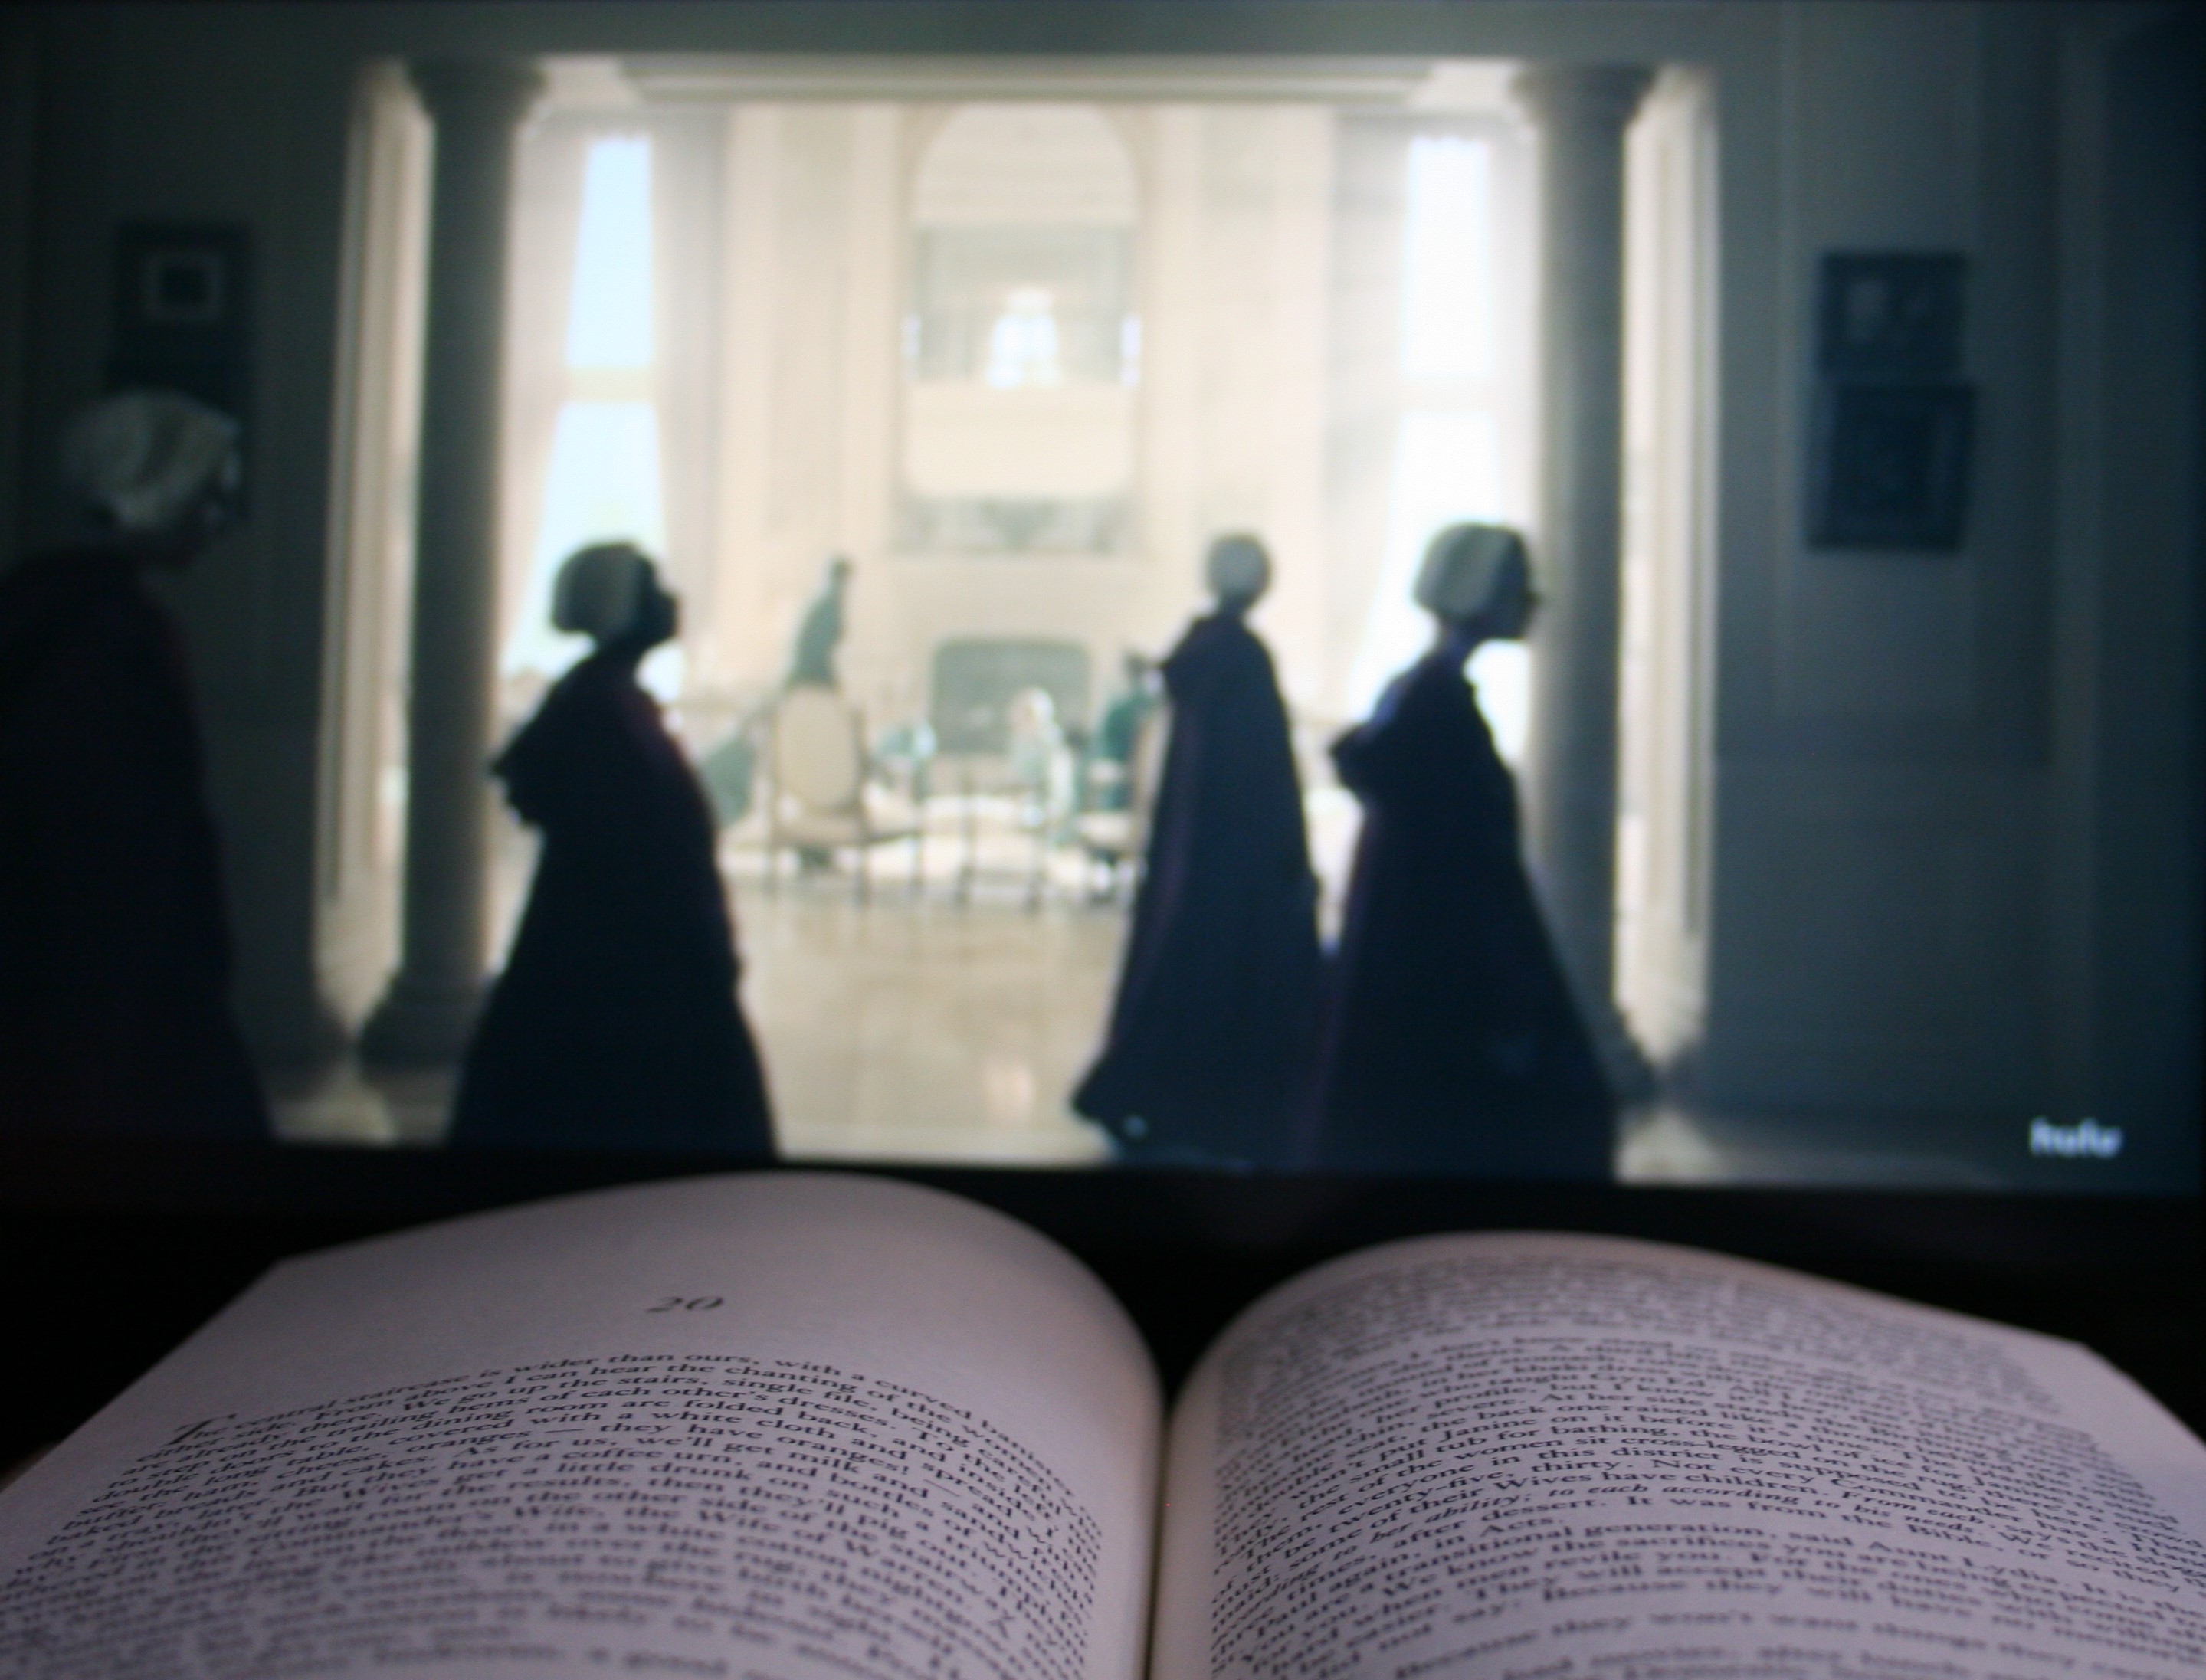 Handmaid's Tale, from book to screen.